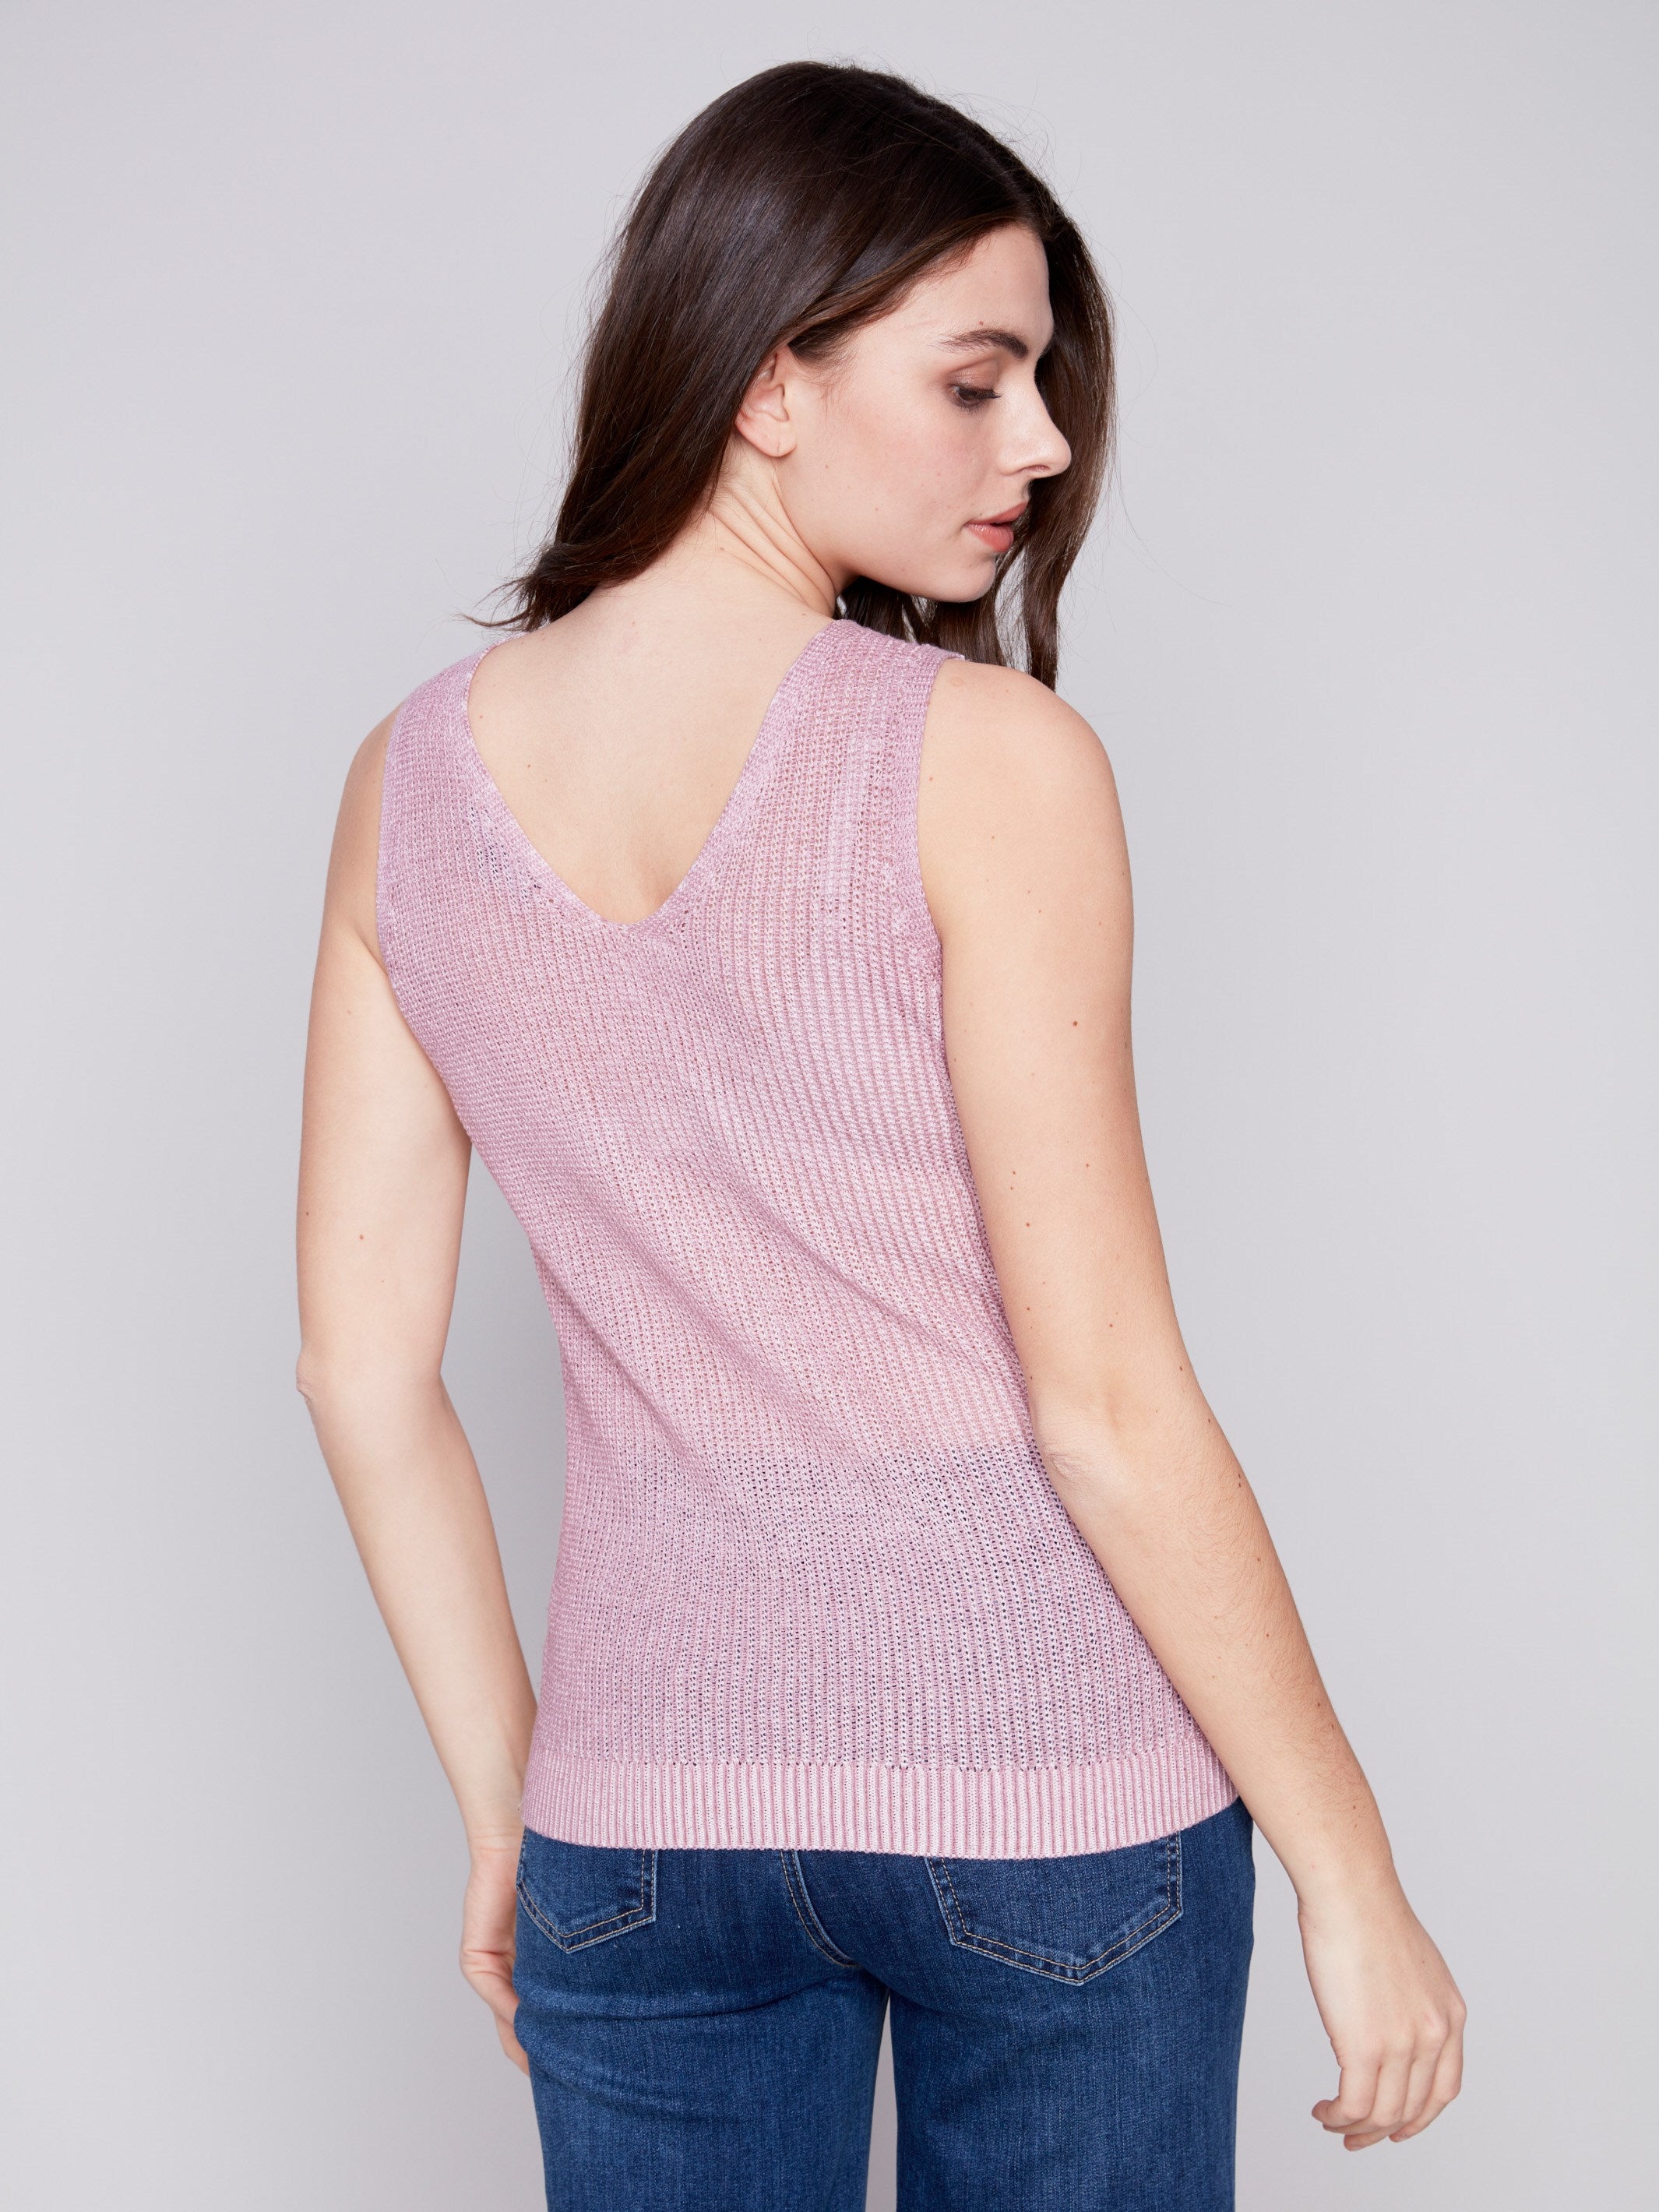 Cold-Dye Knit Cami - Dusty Rose - Charlie B Collection Canada - Image 2